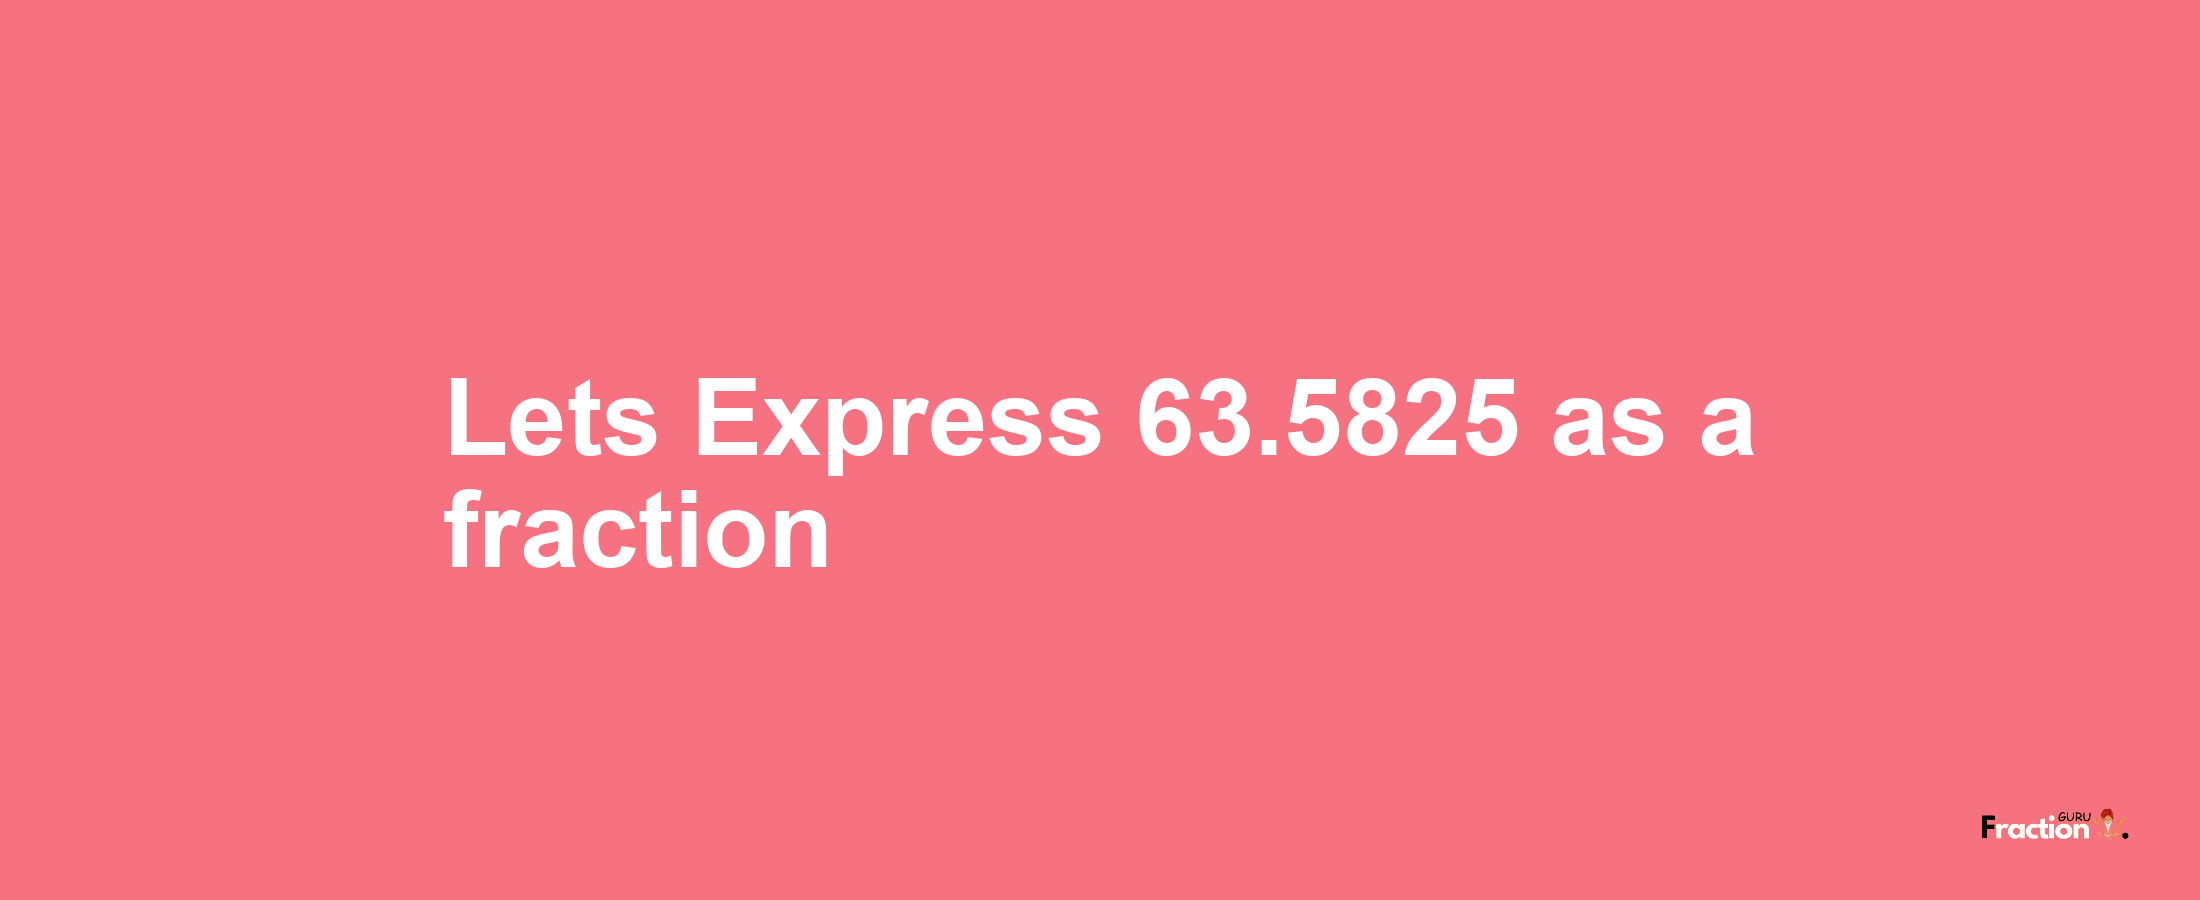 Lets Express 63.5825 as afraction